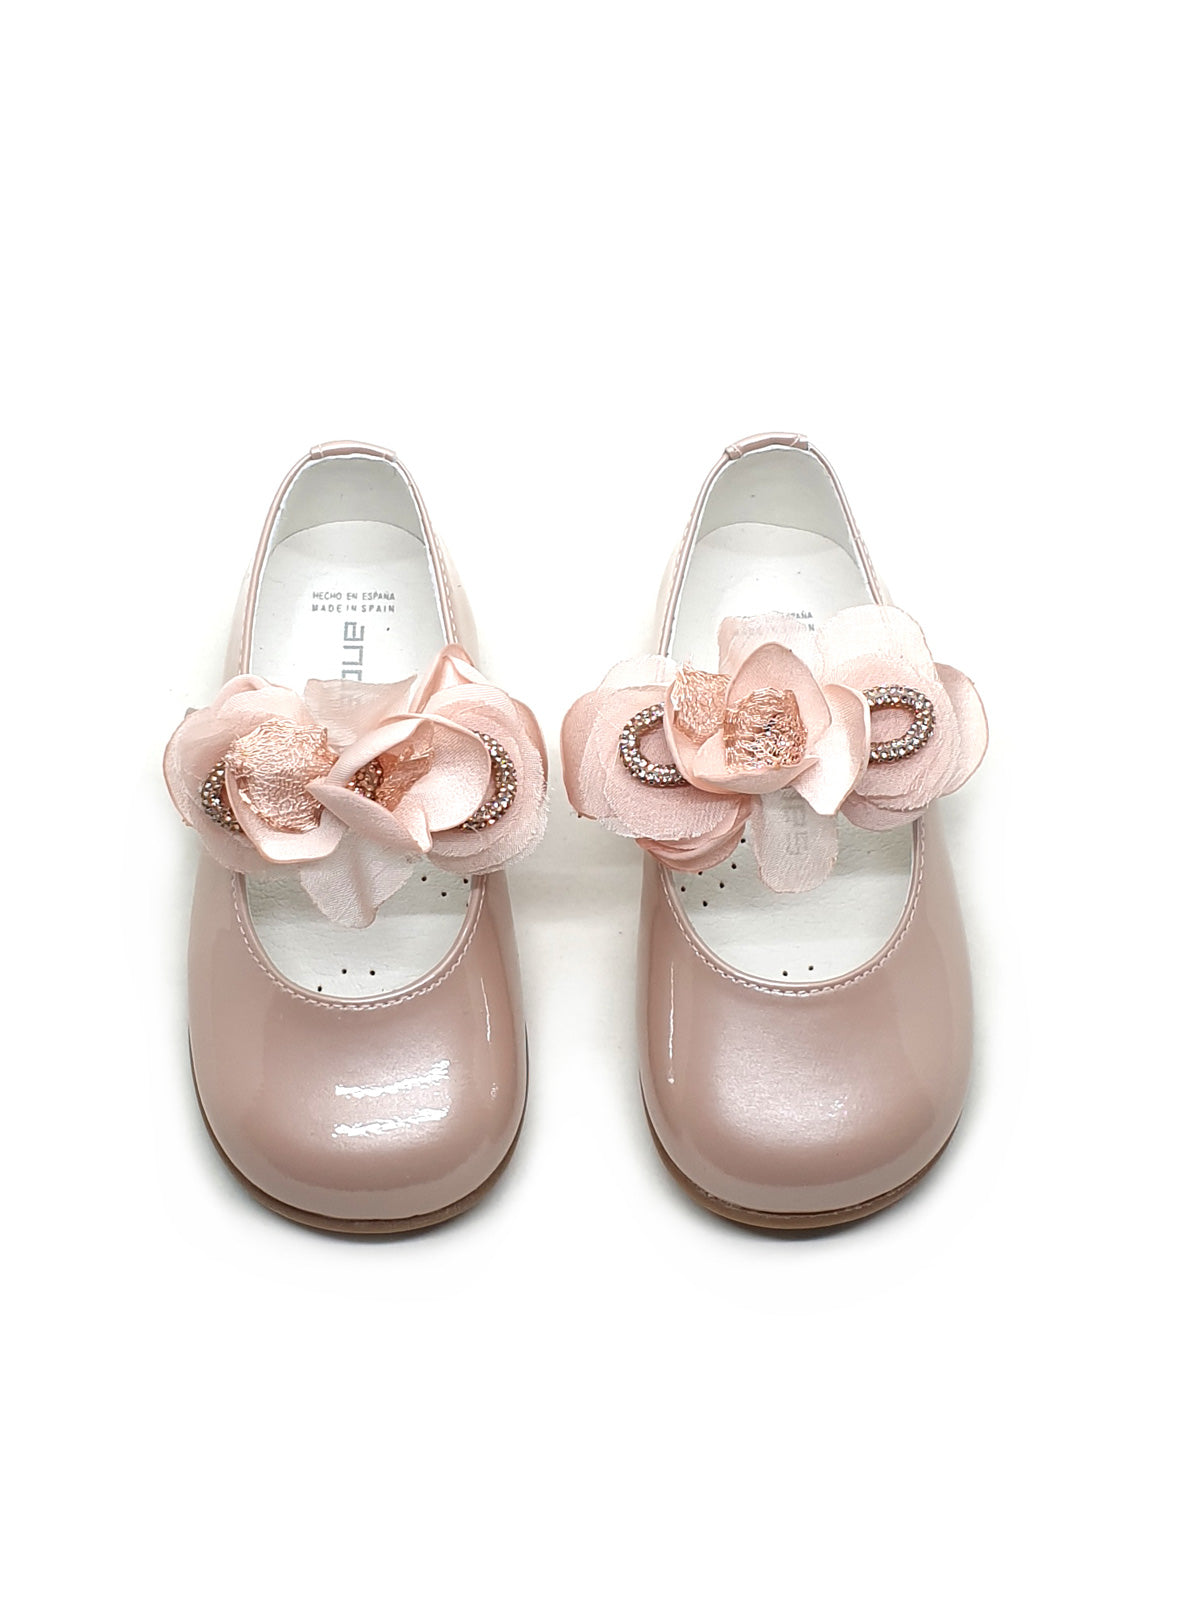 Leather ballerina shoes with floral-appliqué